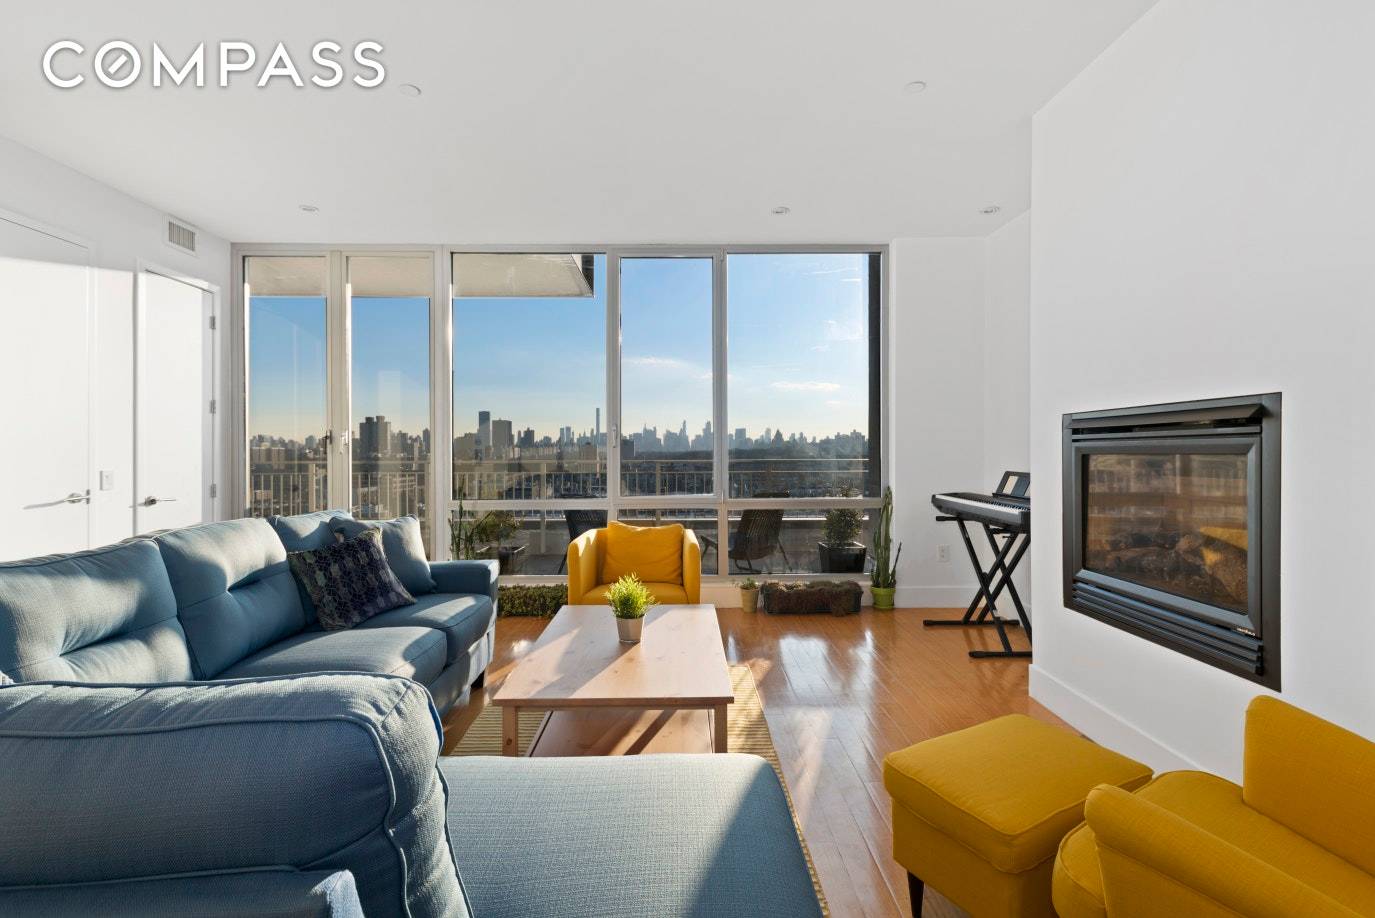 Six Glass Doors open to four terrace areas with views of Midtown, Central Park, Morningside Park and the recently landmarked Mt.